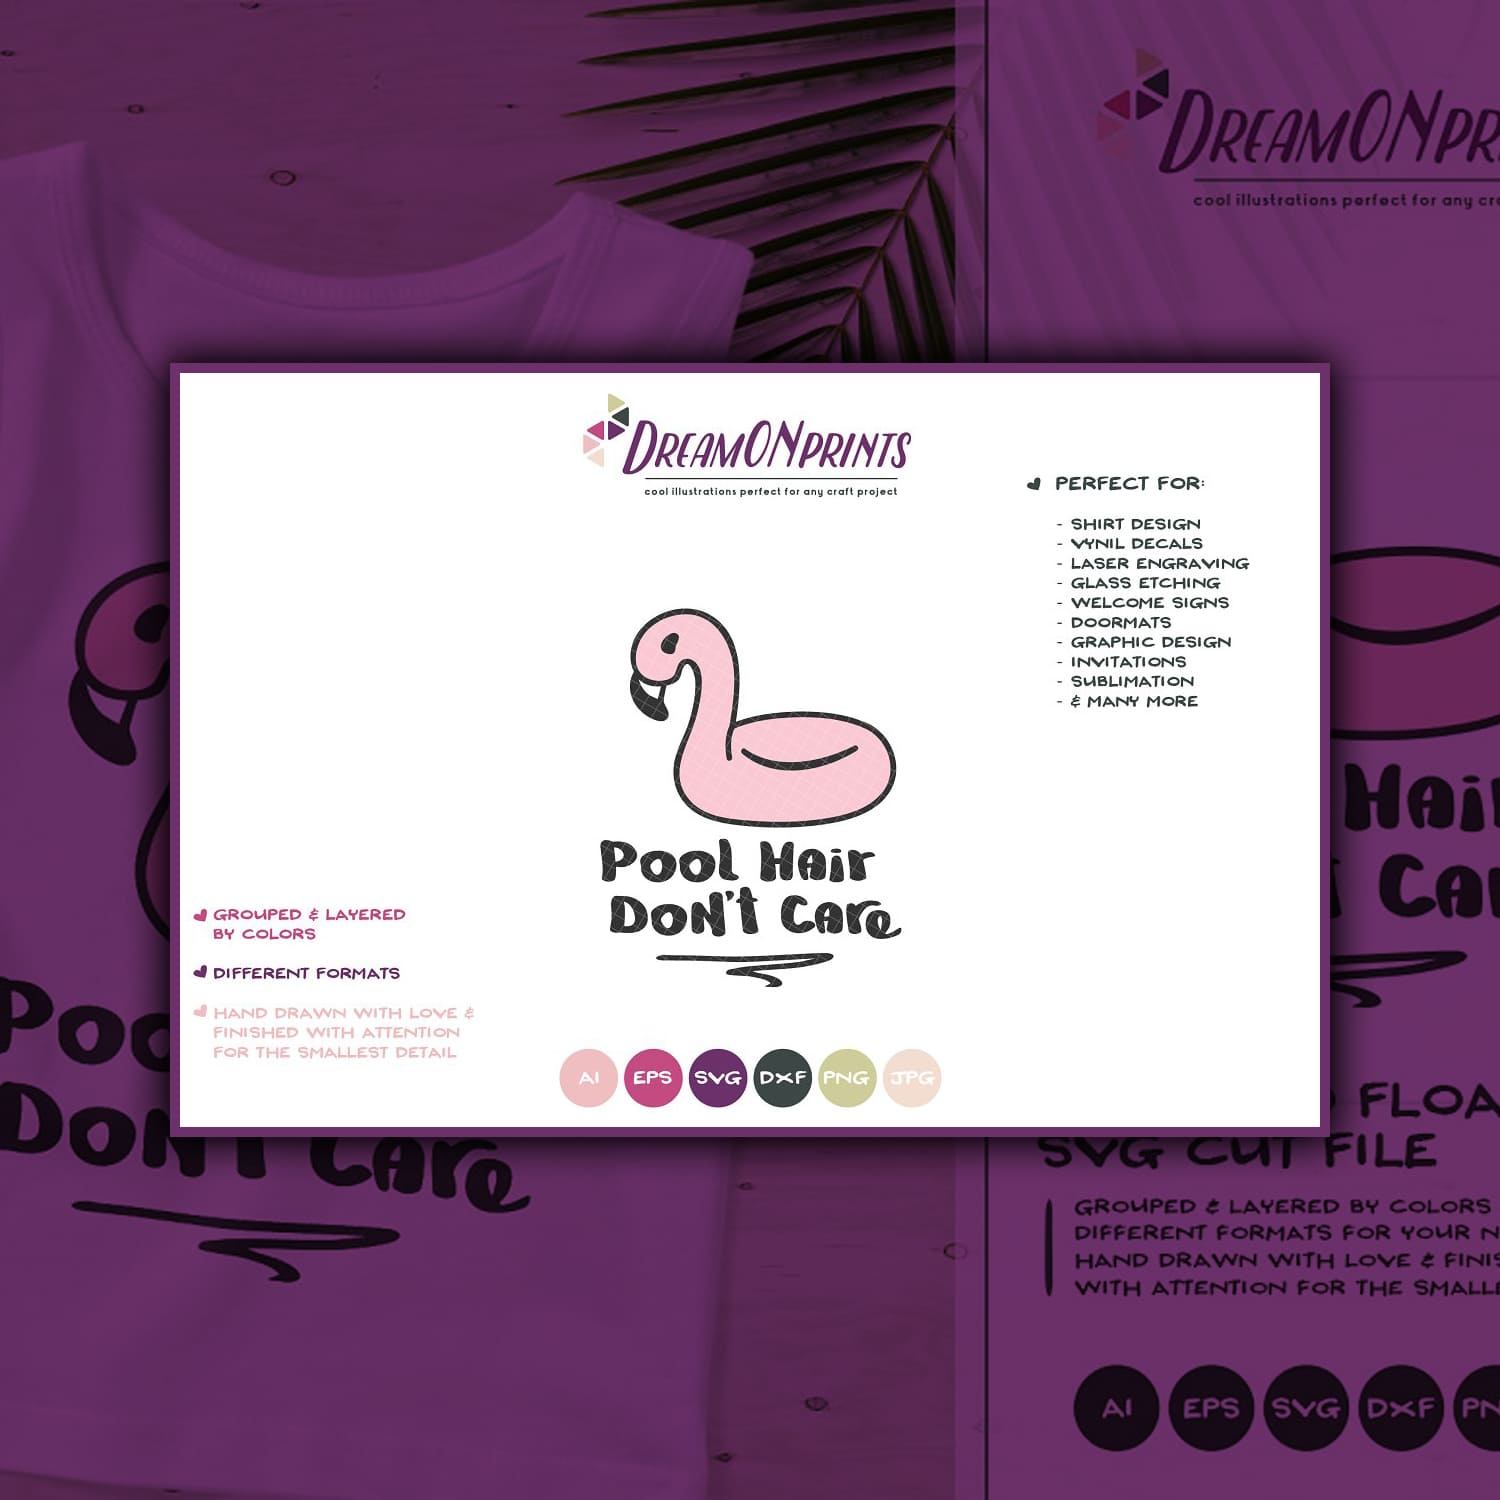 Pool Hair Don't Care | Flamingo SVG created by DreamONprints.